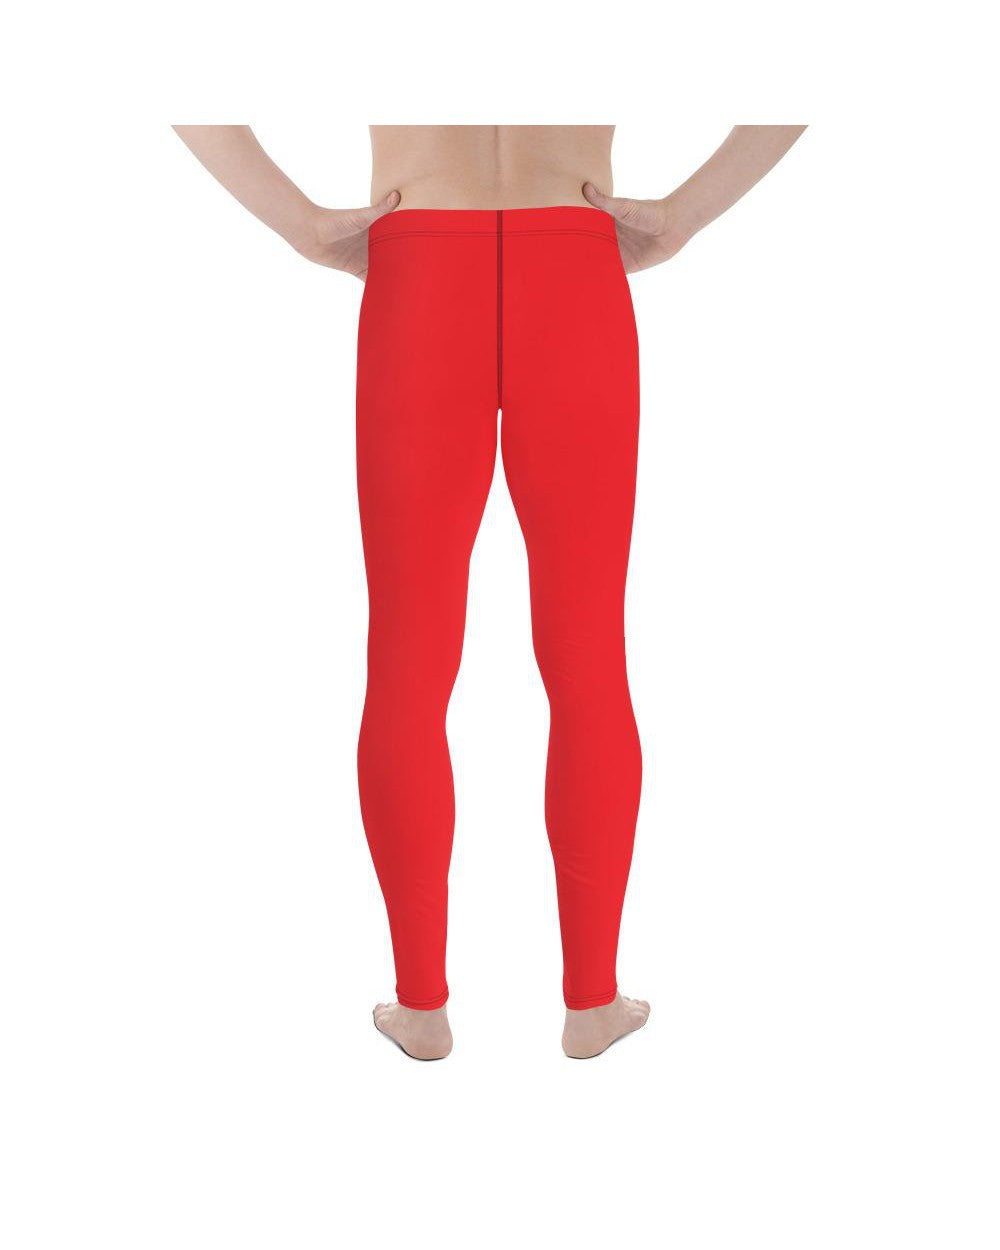 Mens Leggings Workout Solid Hot Red Meggings | Gearbunch.com